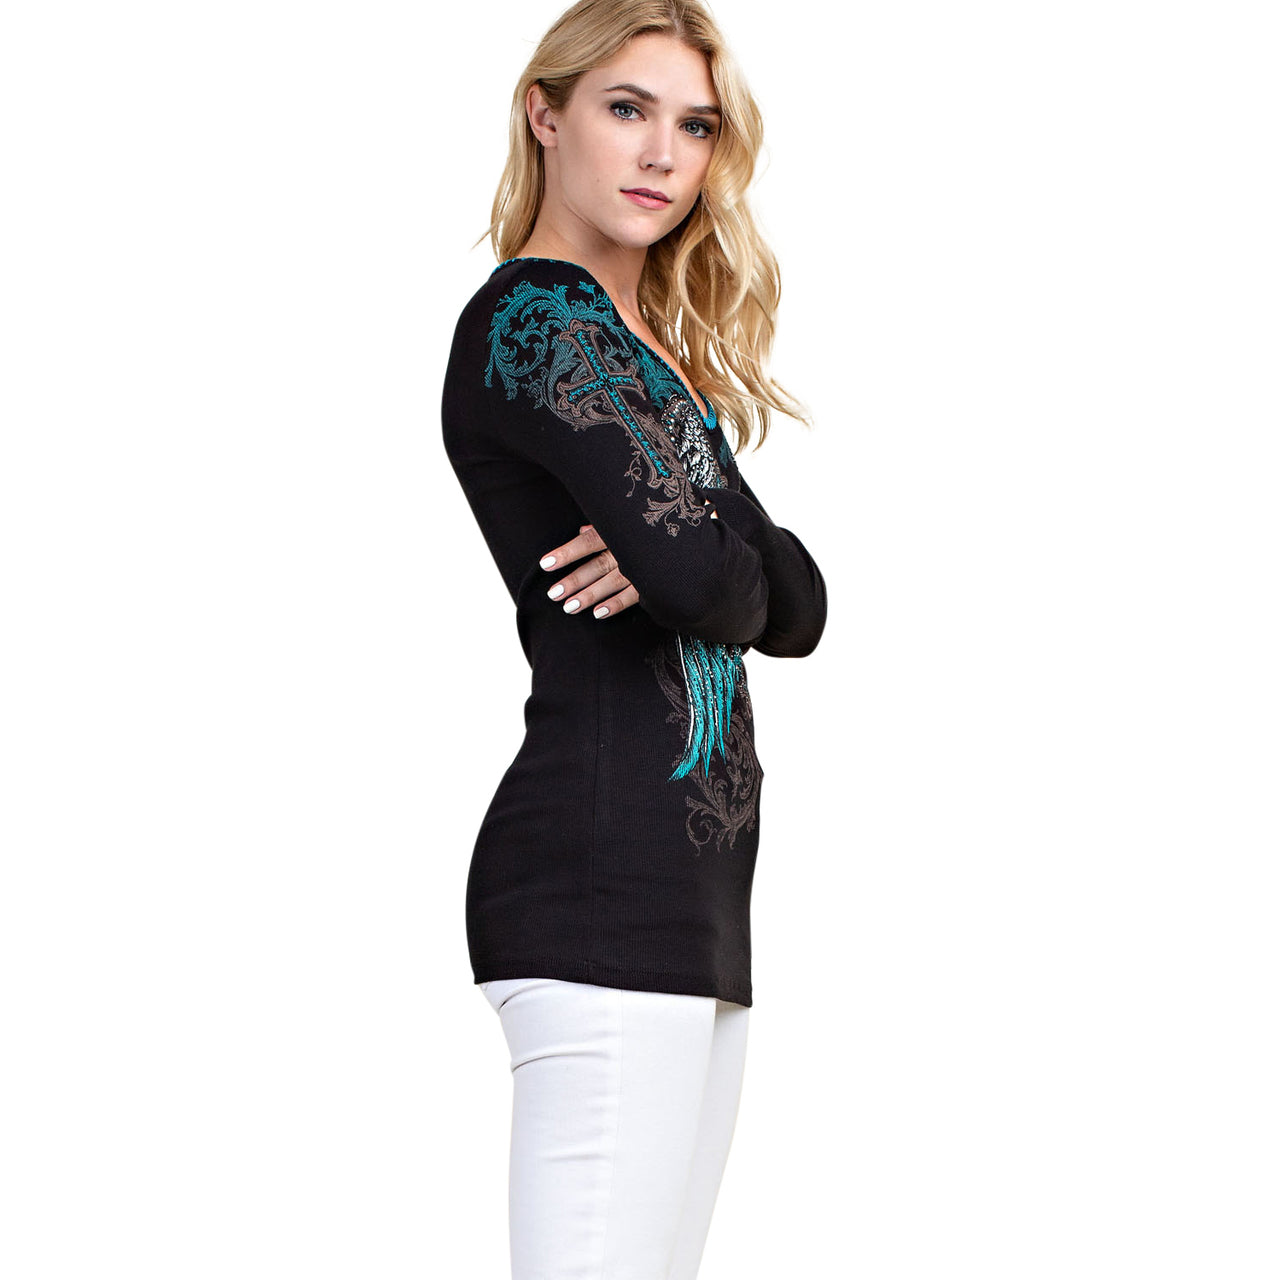 Vocal Classic Cross Wing TOP W/ Stitches Long Sleeve